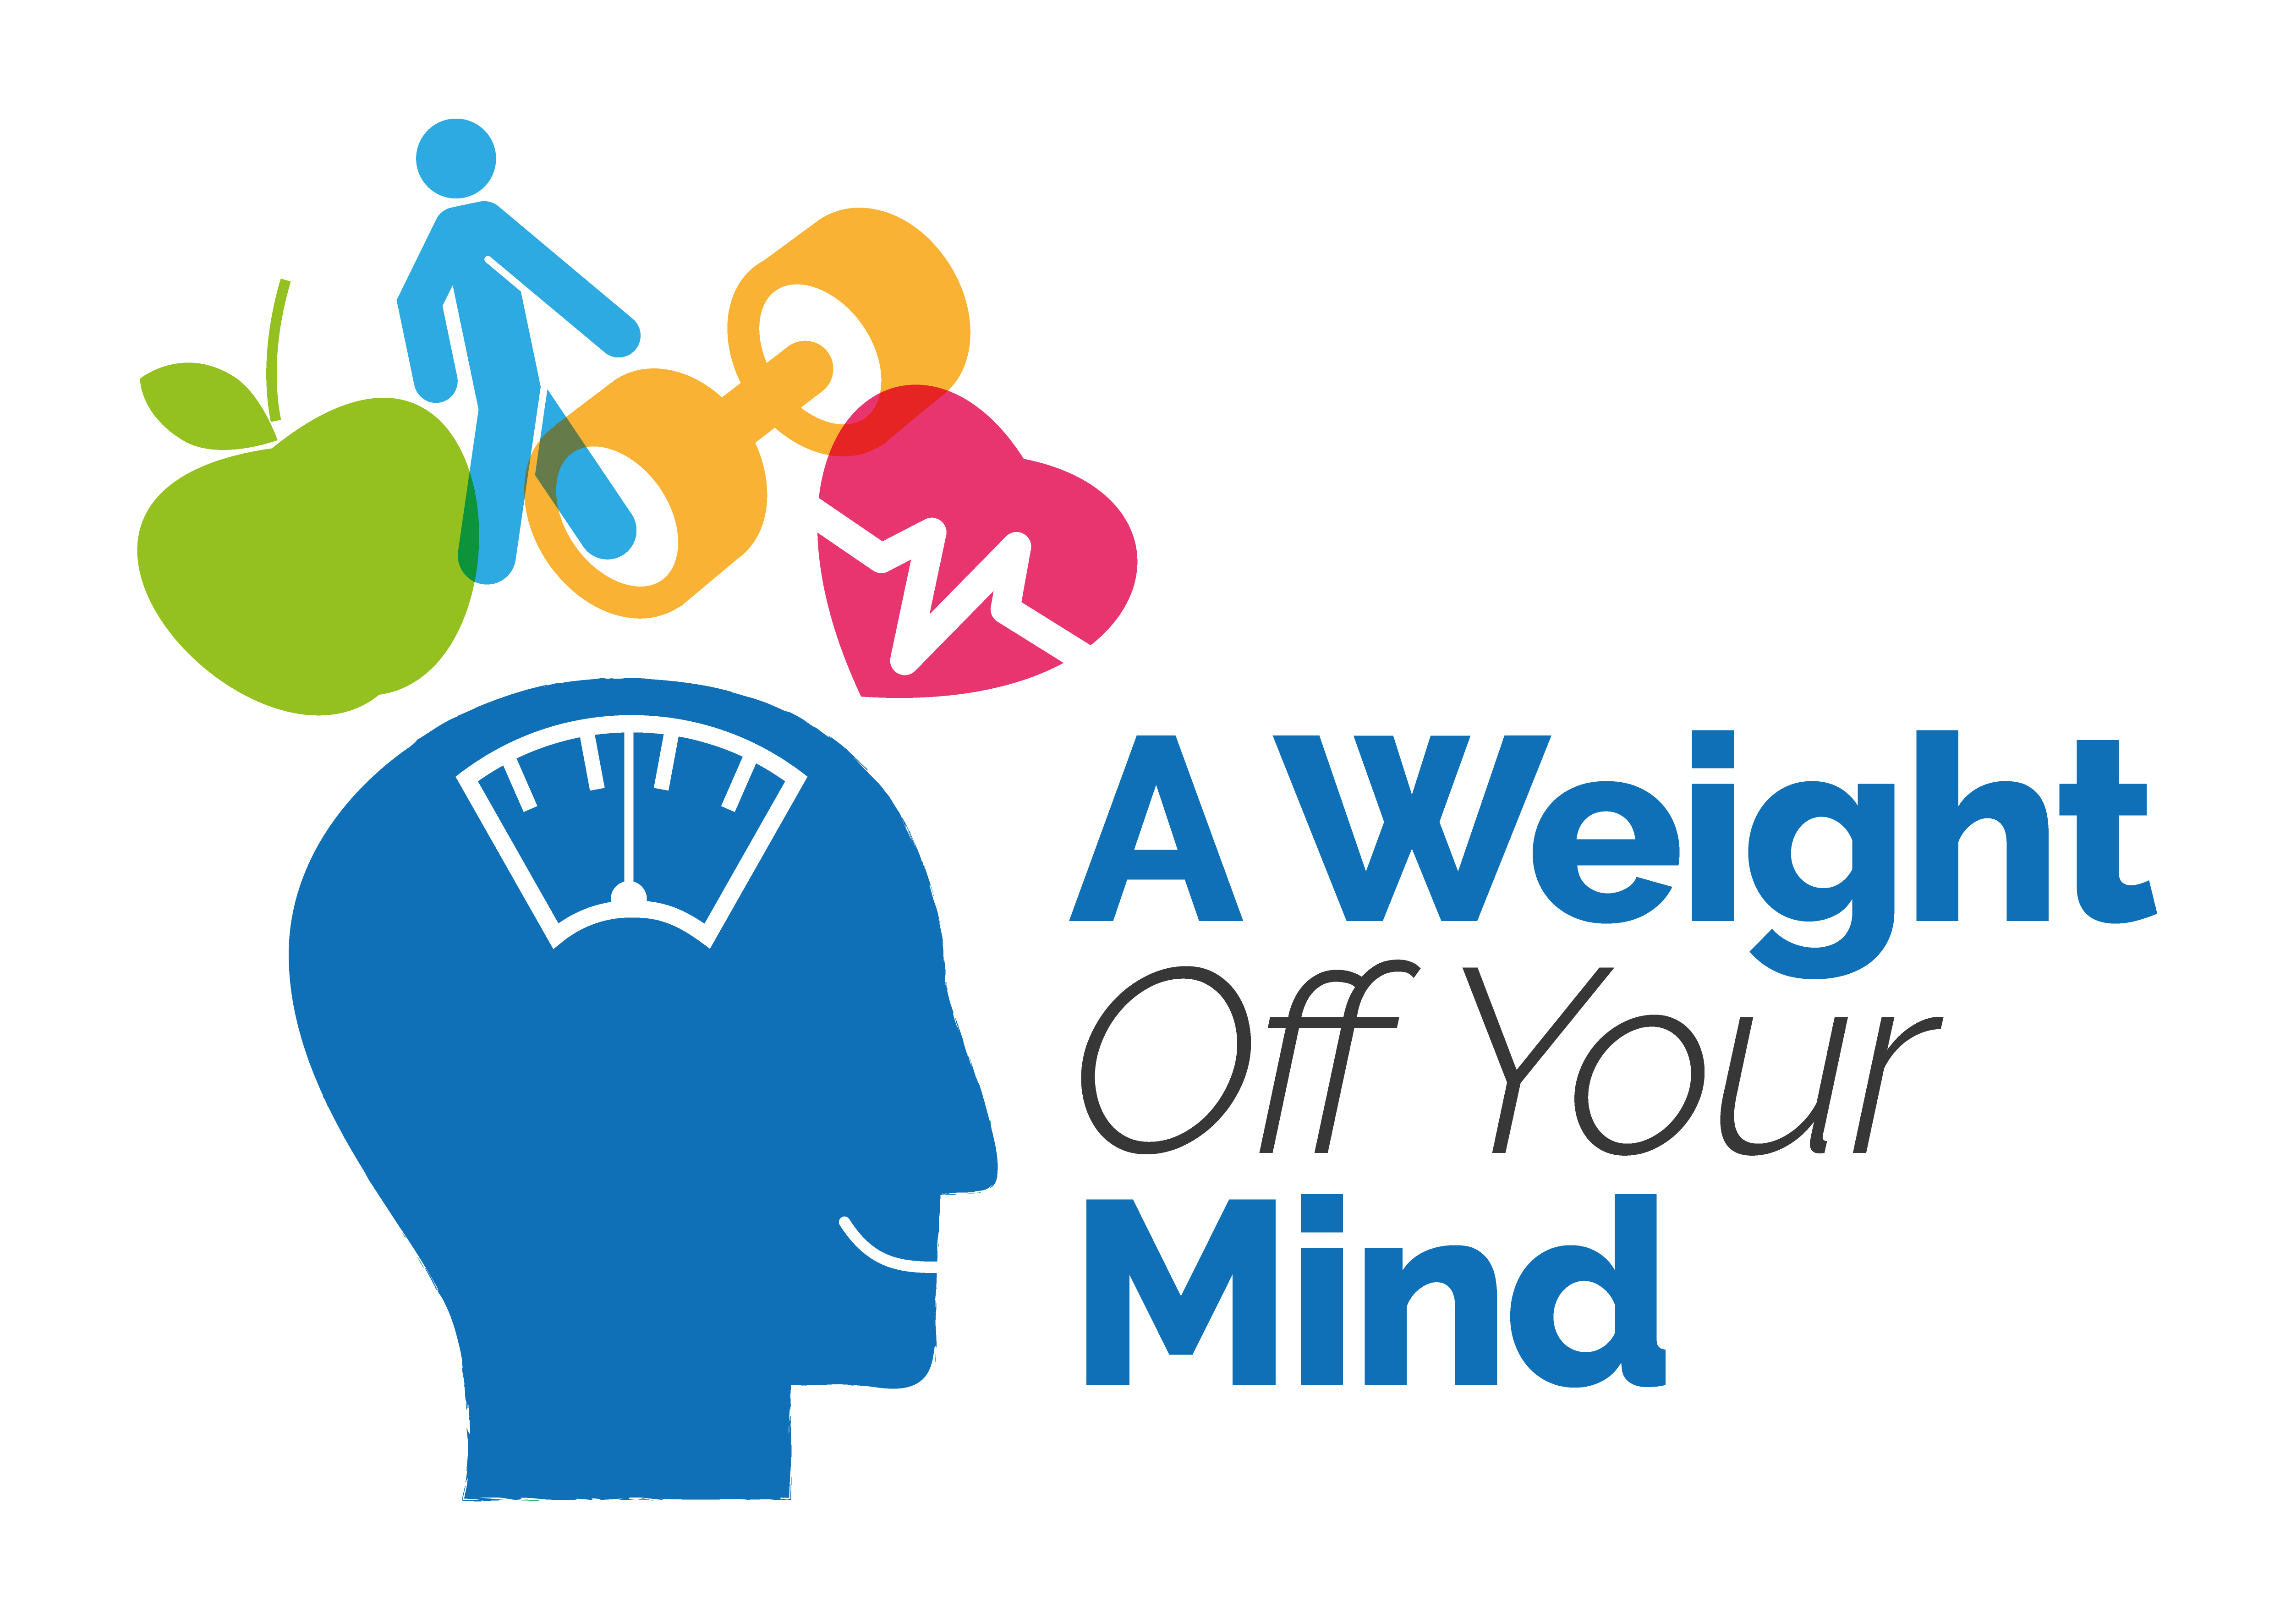 A Weight Off Your Mind